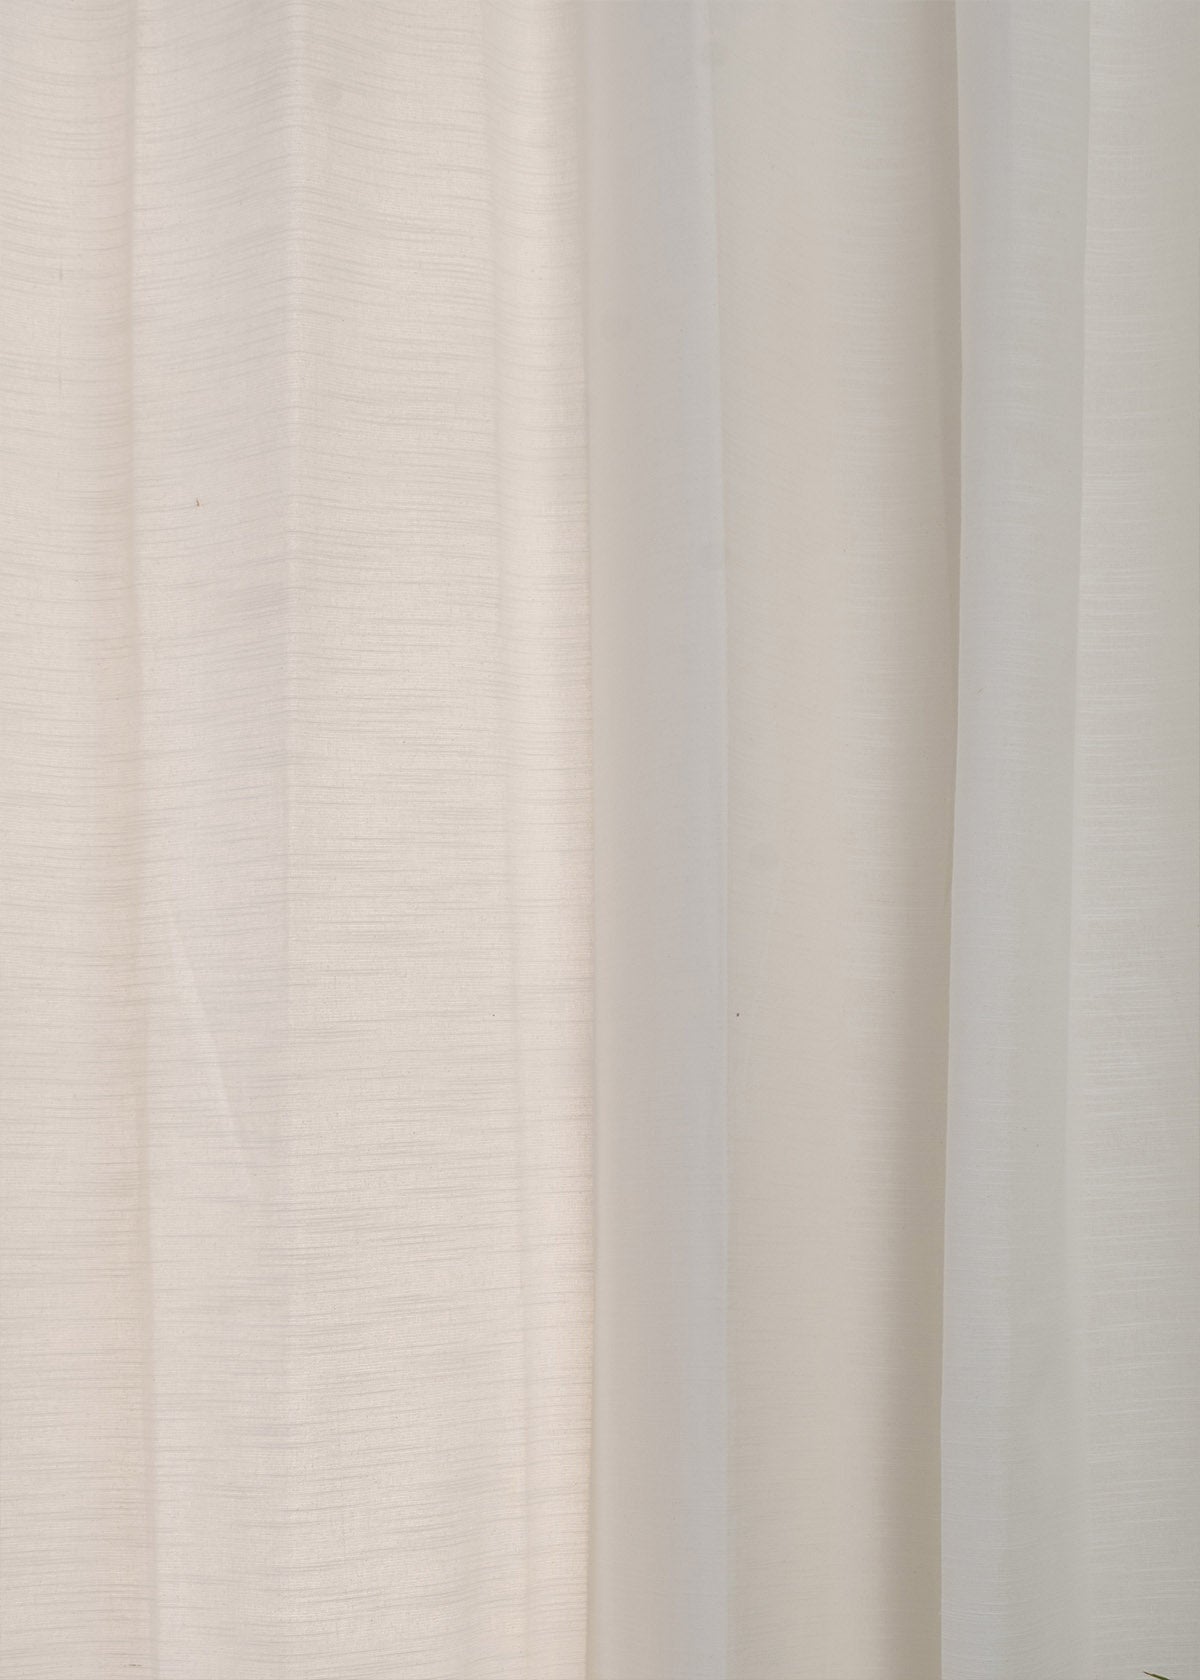 Solid white 100% cotton plain curtain for bedroom - Room darkening - Pack of 1